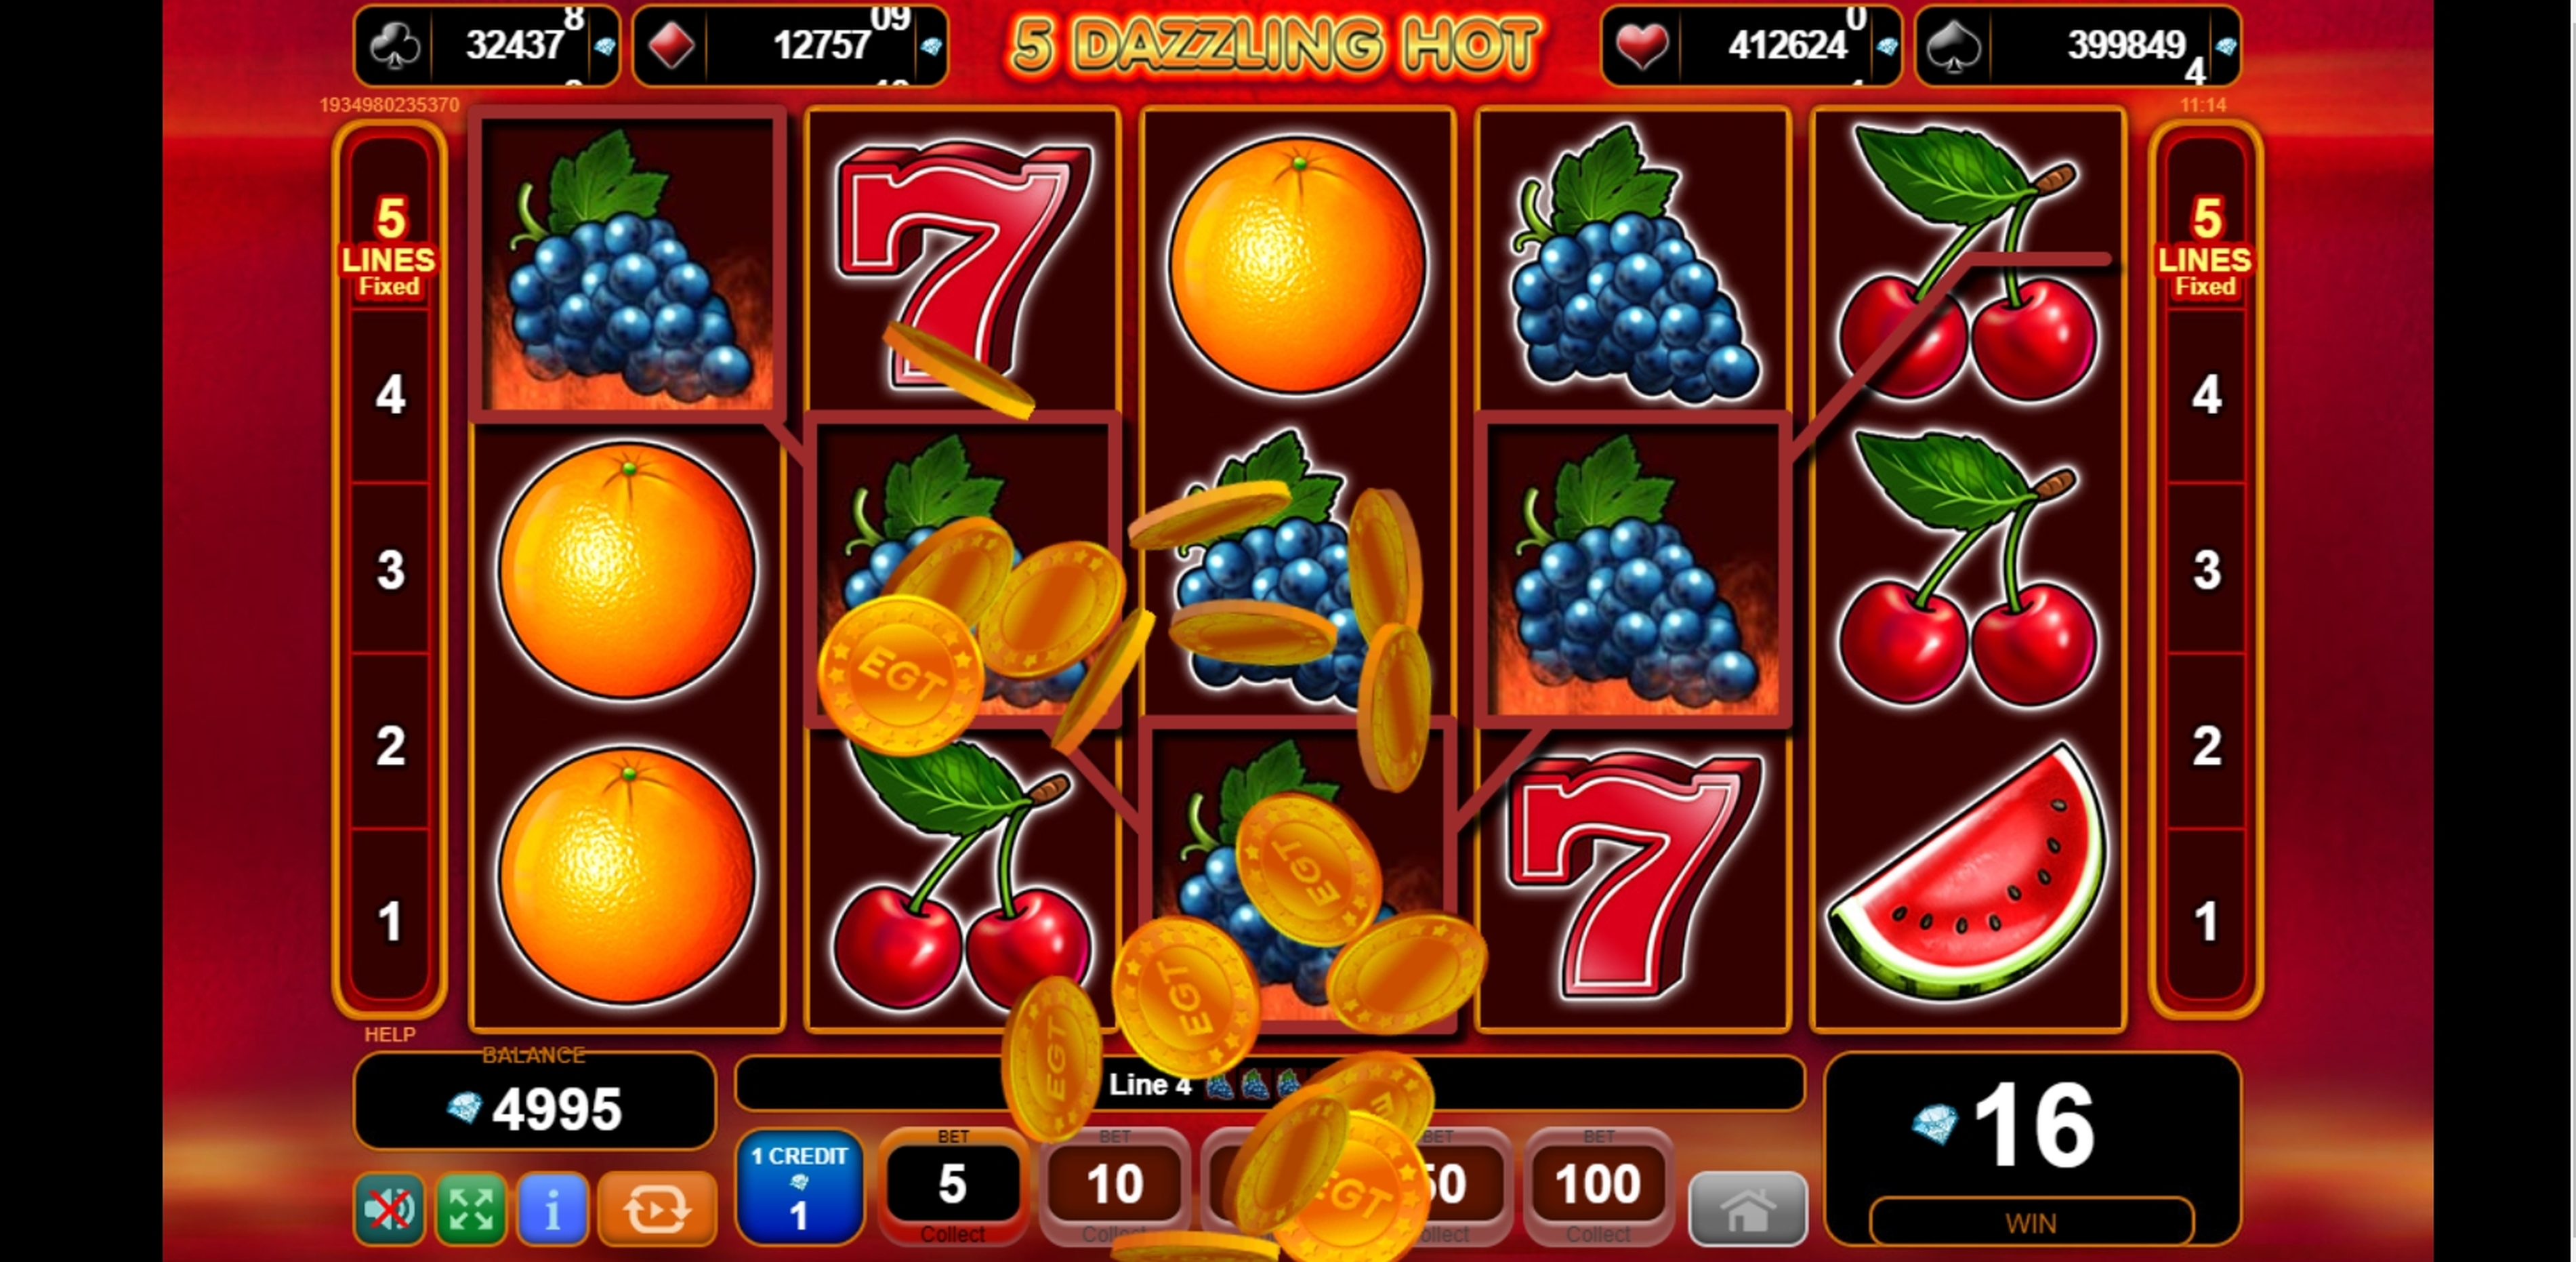 Win Money in 5 Dazzling Hot Free Slot Game by EGT